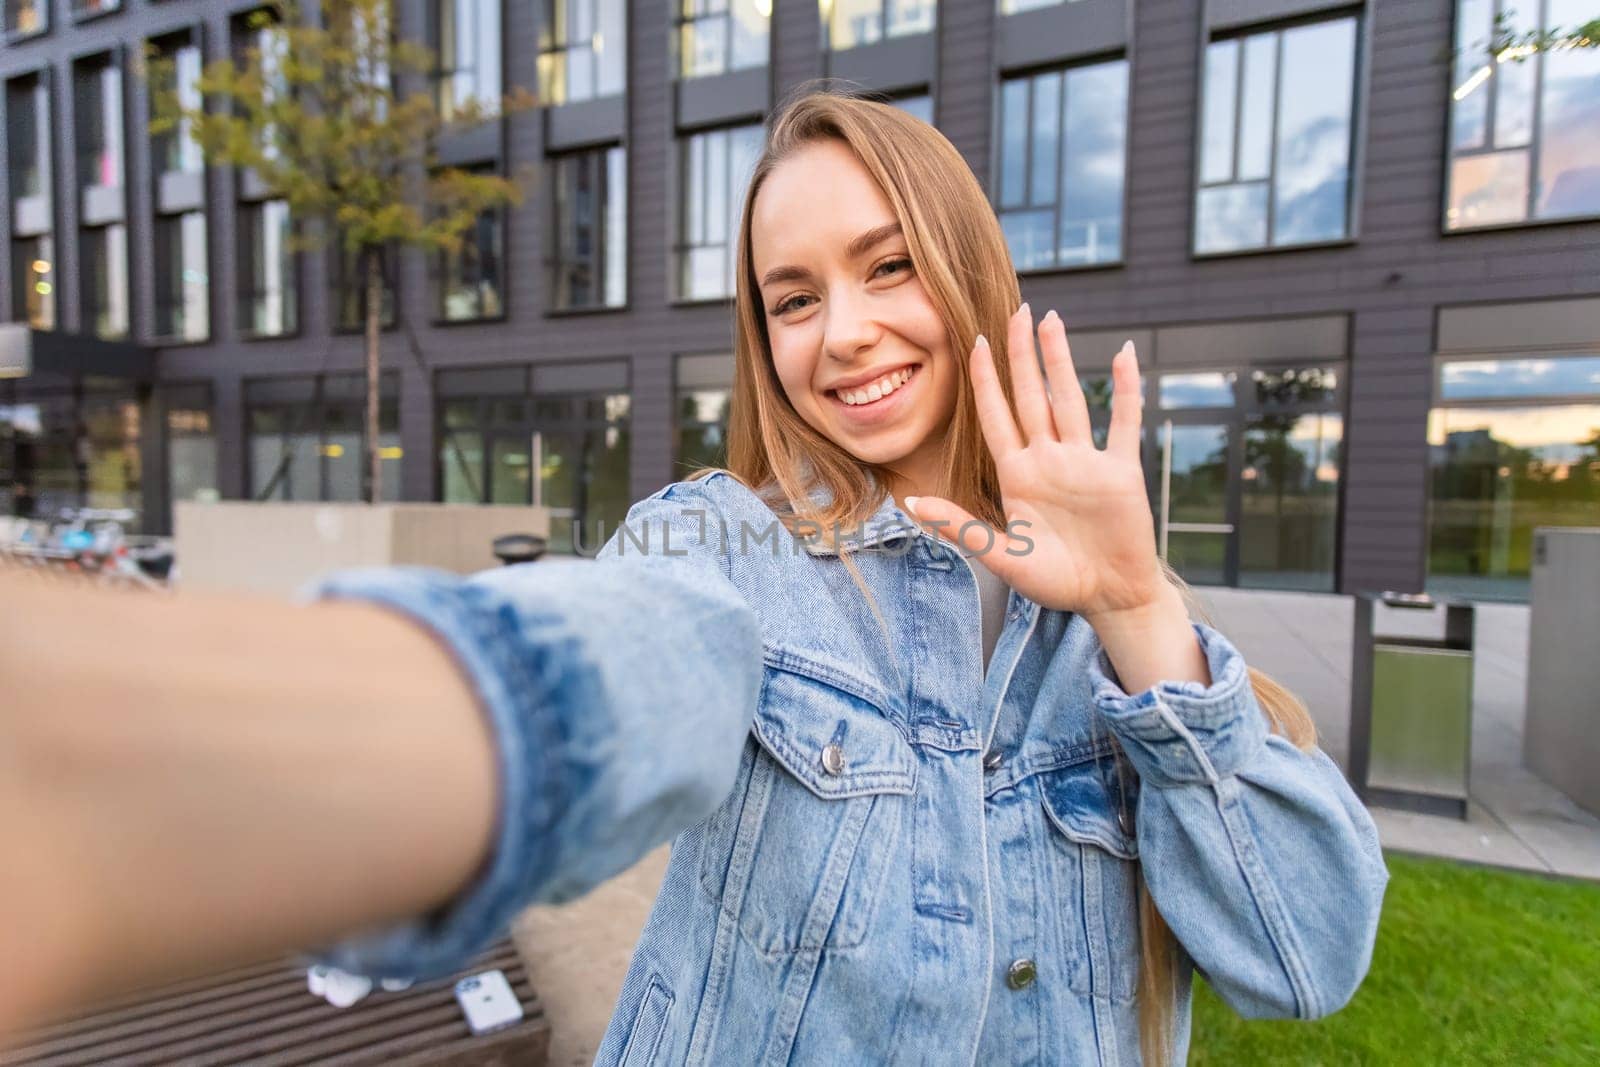 Attractive young female tourist with long blond hair taking a selfie in the street.